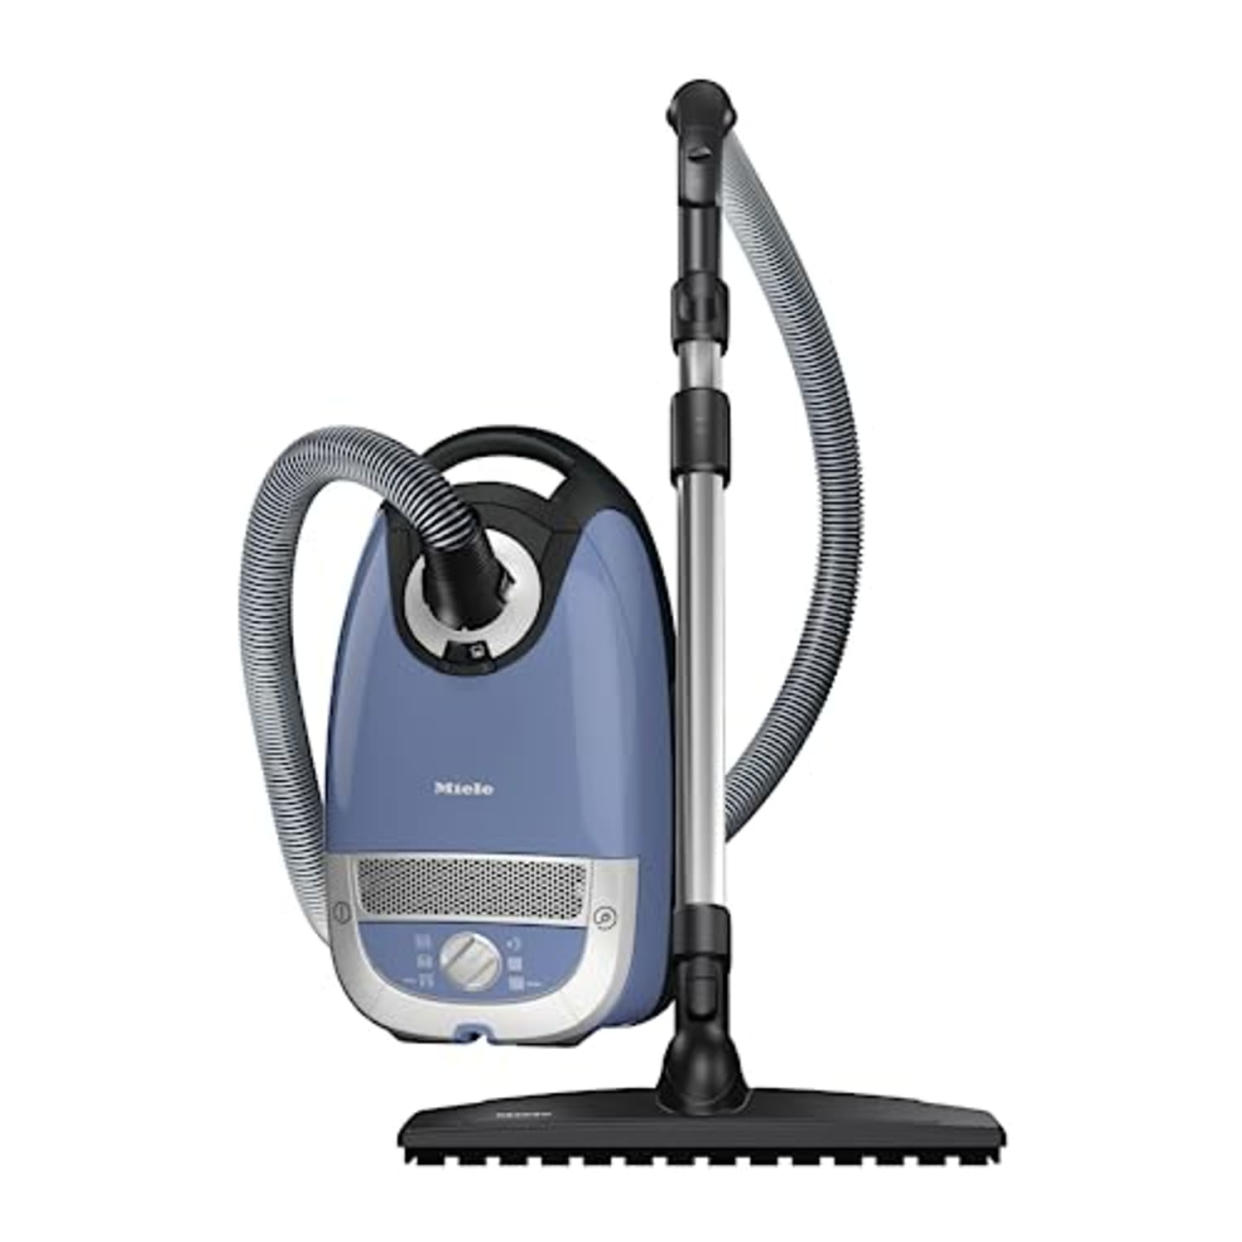 Miele Complete Hardfloor Bagged Canister Vacuum Cleaner, C2 Hard Floor, Tech Blue (AMAZON)